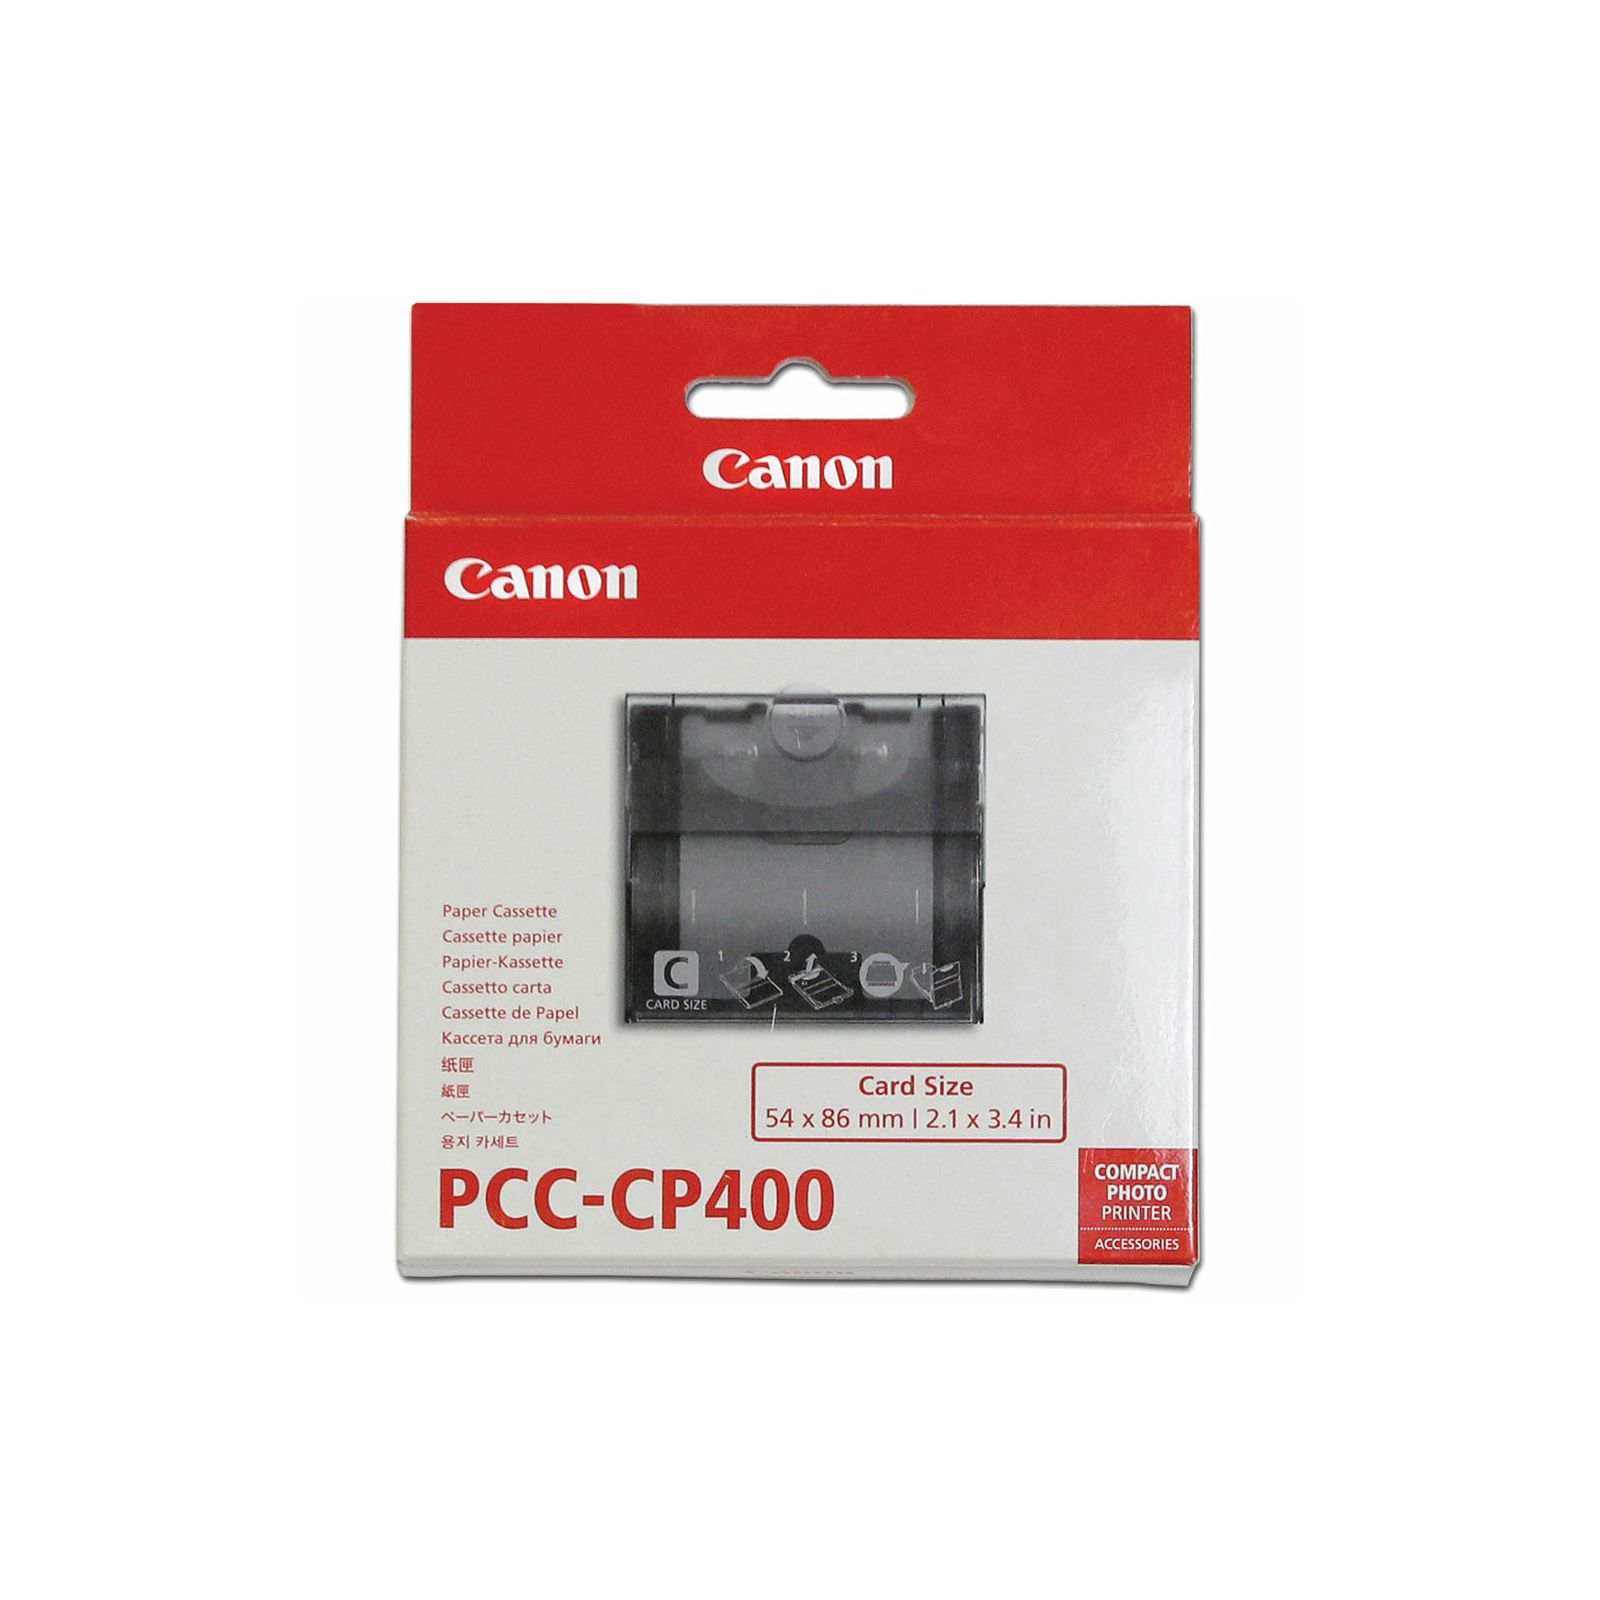 Canon PCC-CP400 Card Size Paper Cassette for Selphy CP900, CP910 Printers (6202B001AA)